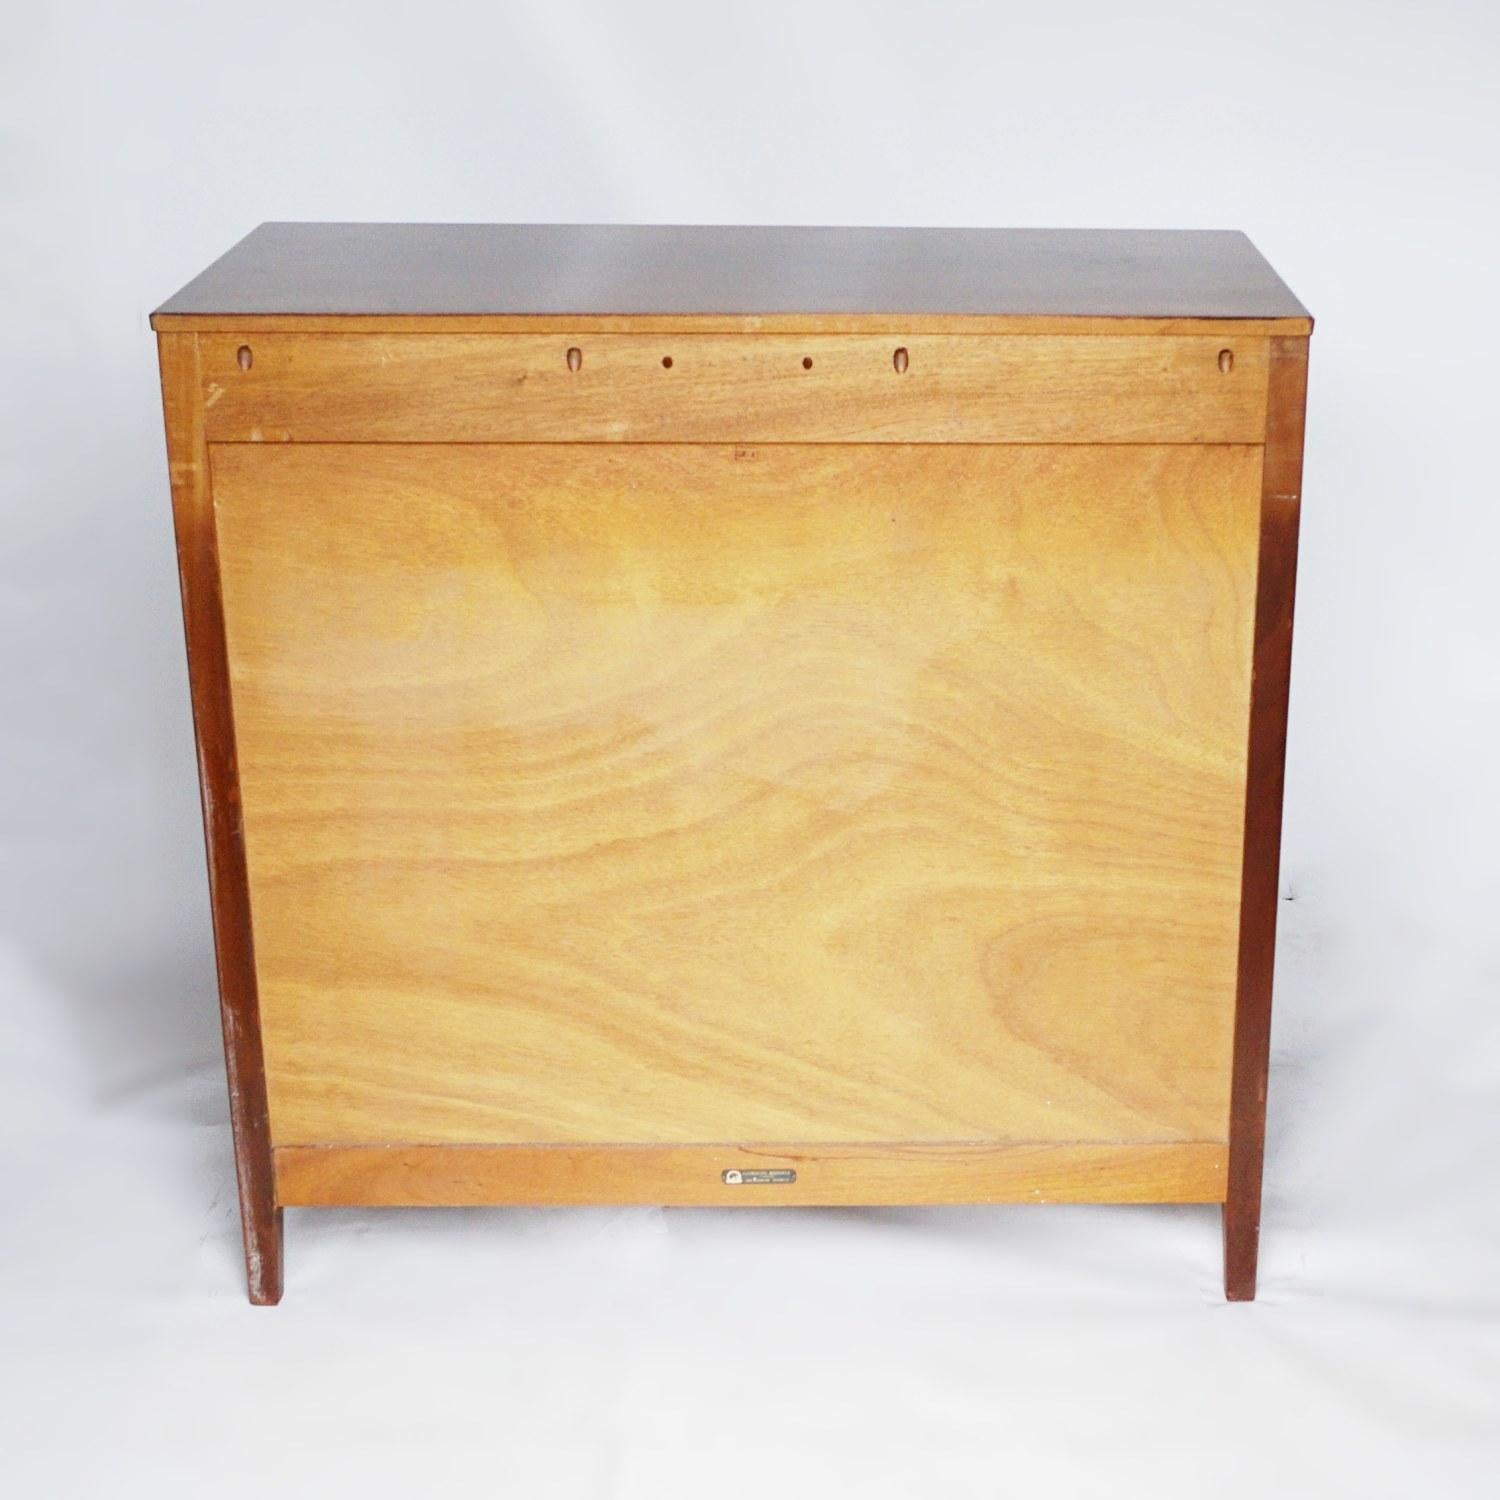 Teak Midcentury Chest of Drawers by Gordon Russell, circa 1960